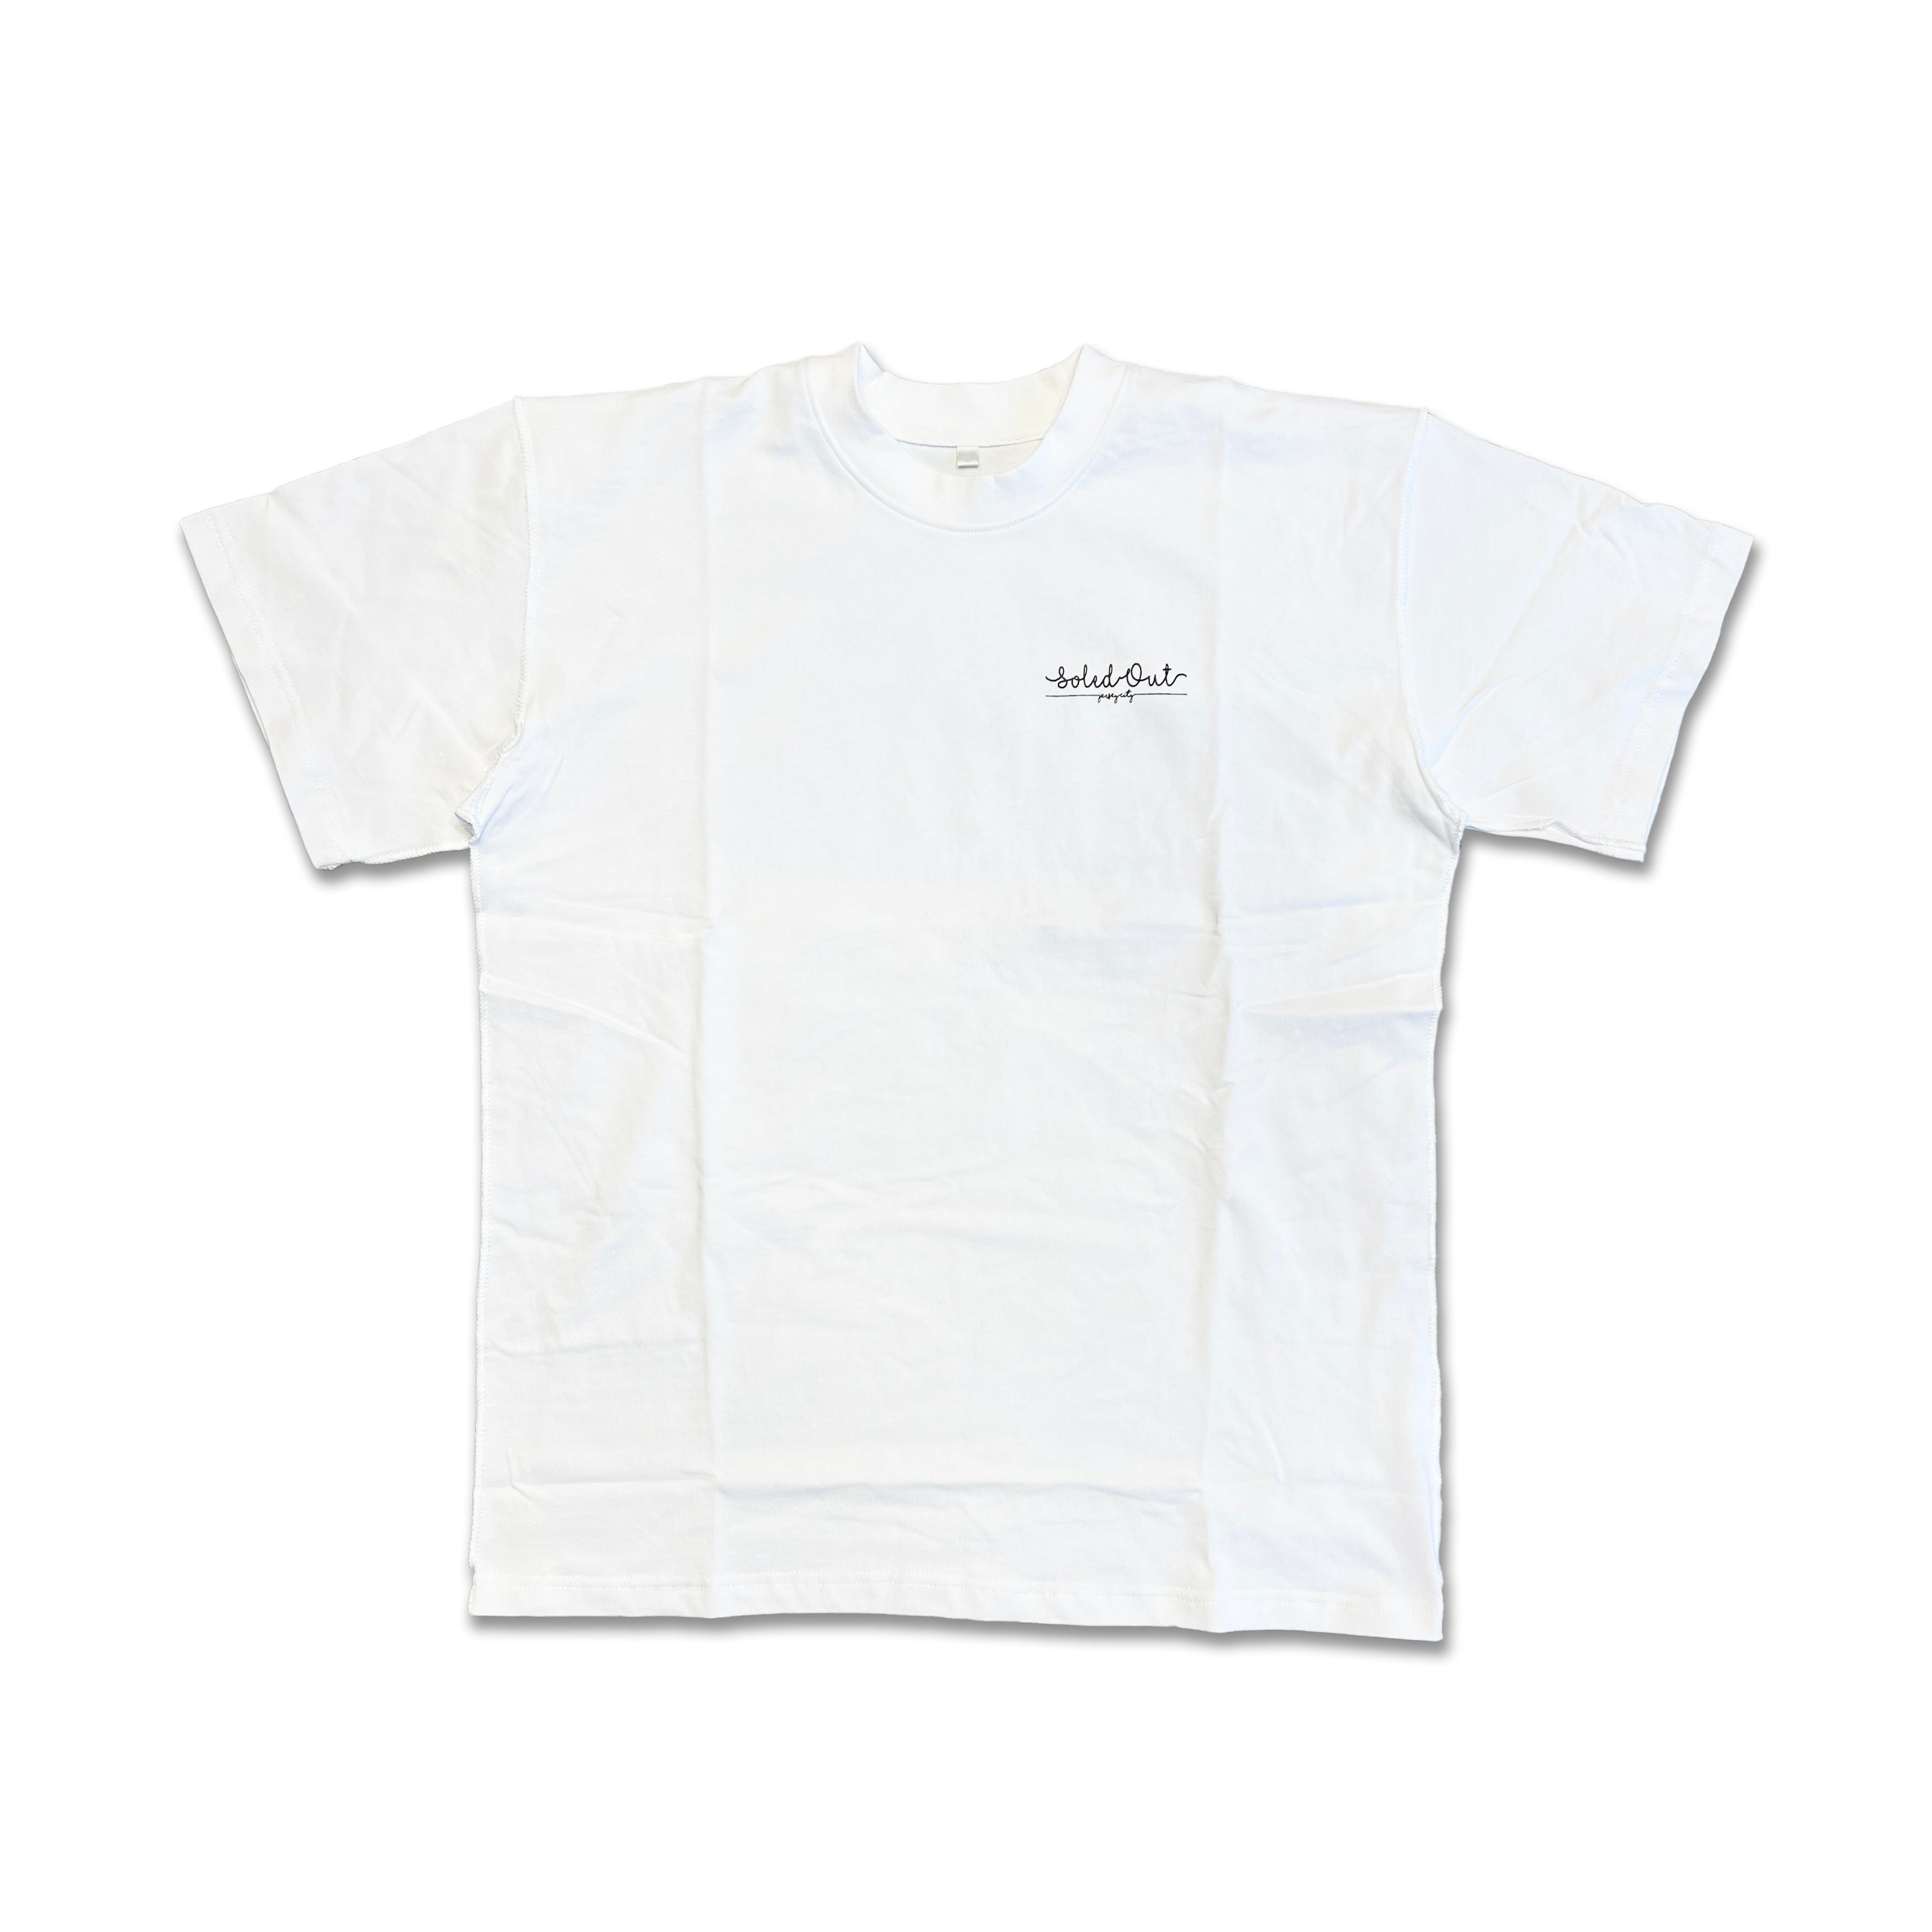 Soled Out T-Shirt "SHOP" White New Size L